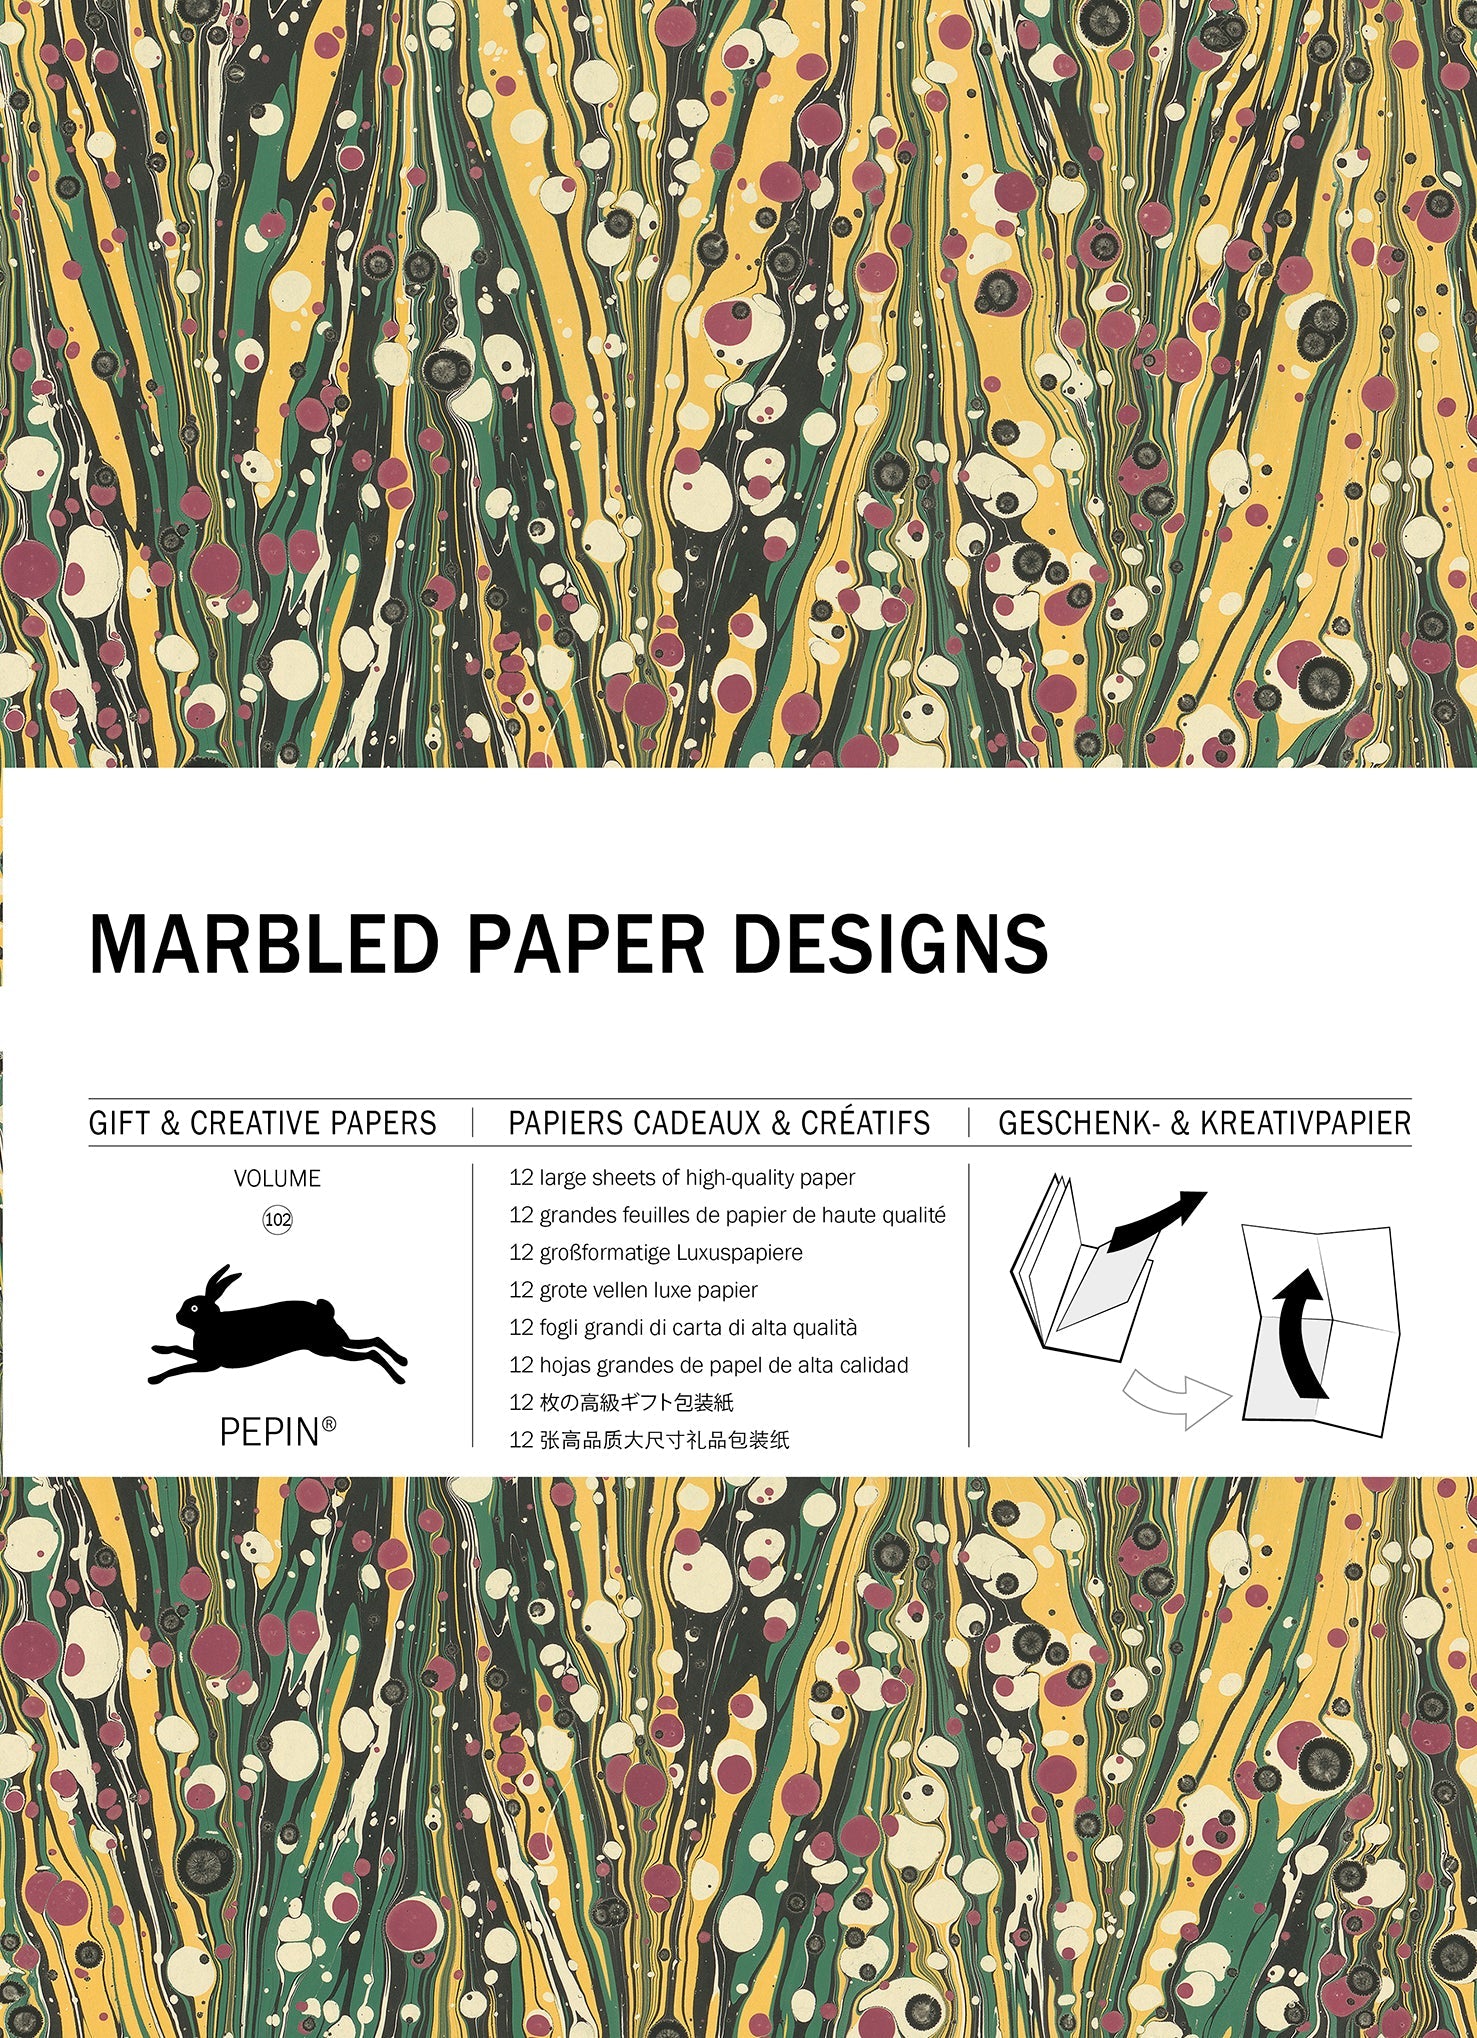 Gift & creative papers - Marbled Paper Designs